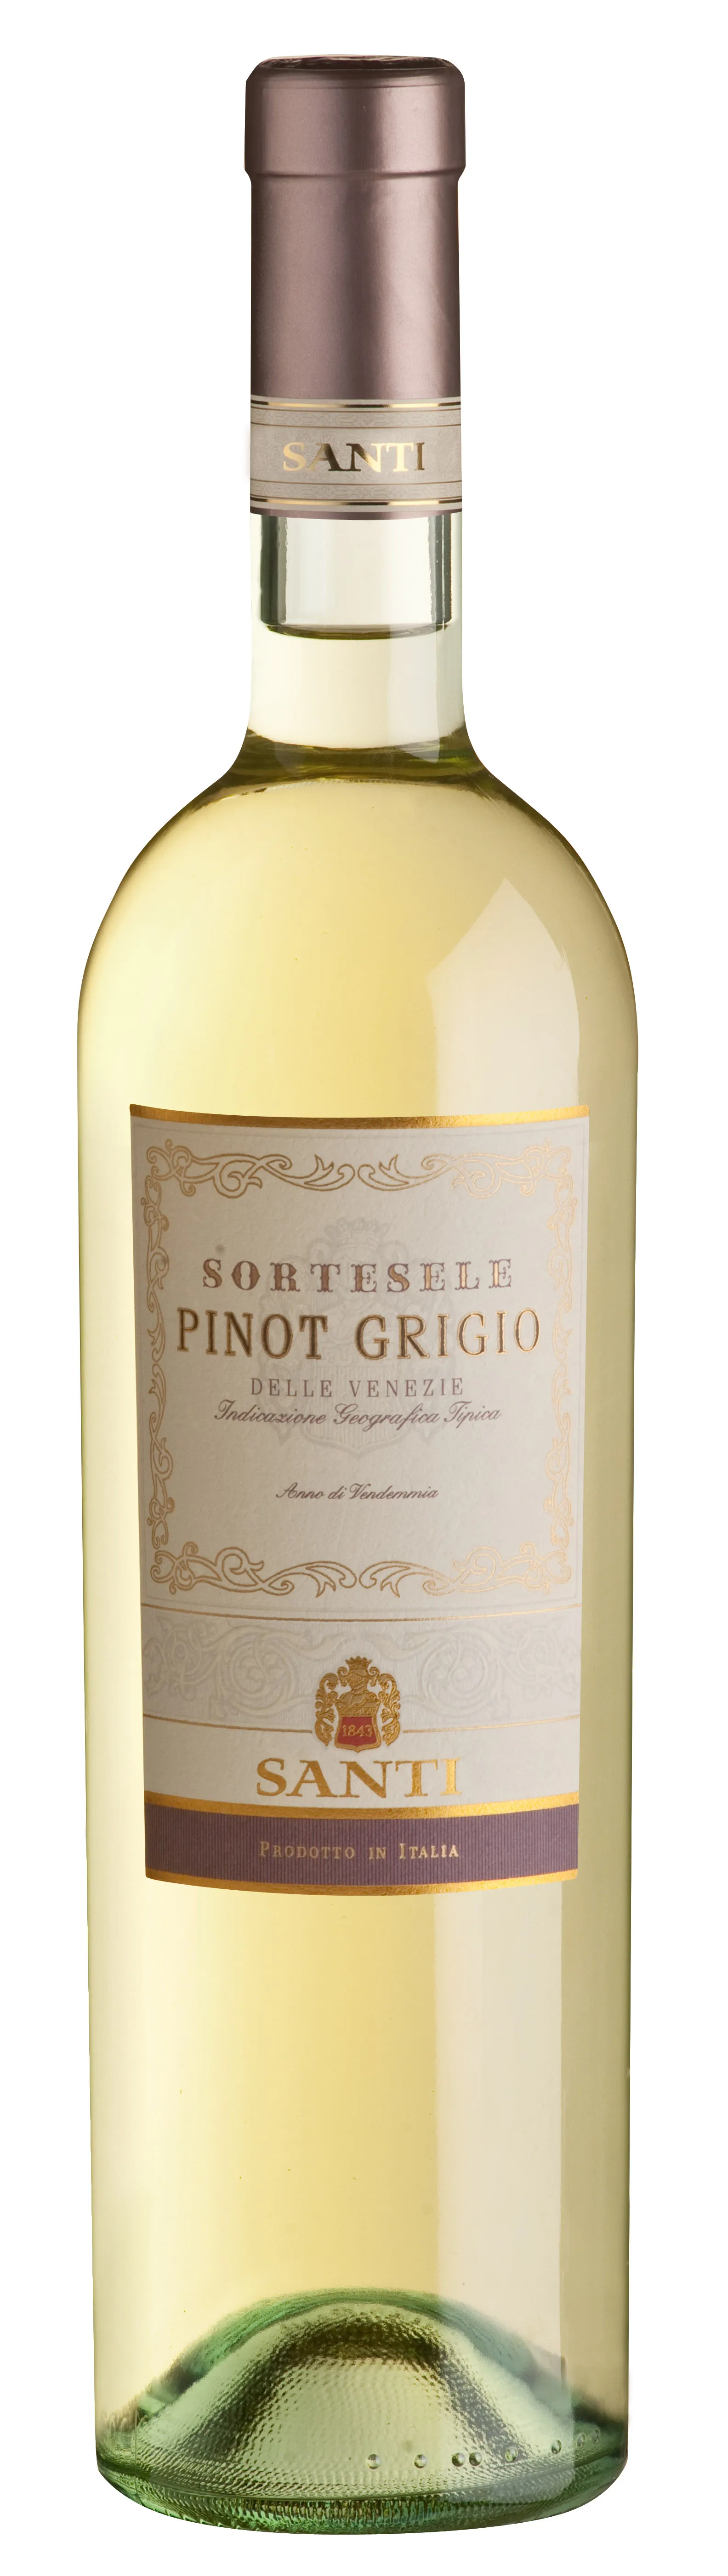 Bottle of Santi Sortesele Pinot Grigio from search results